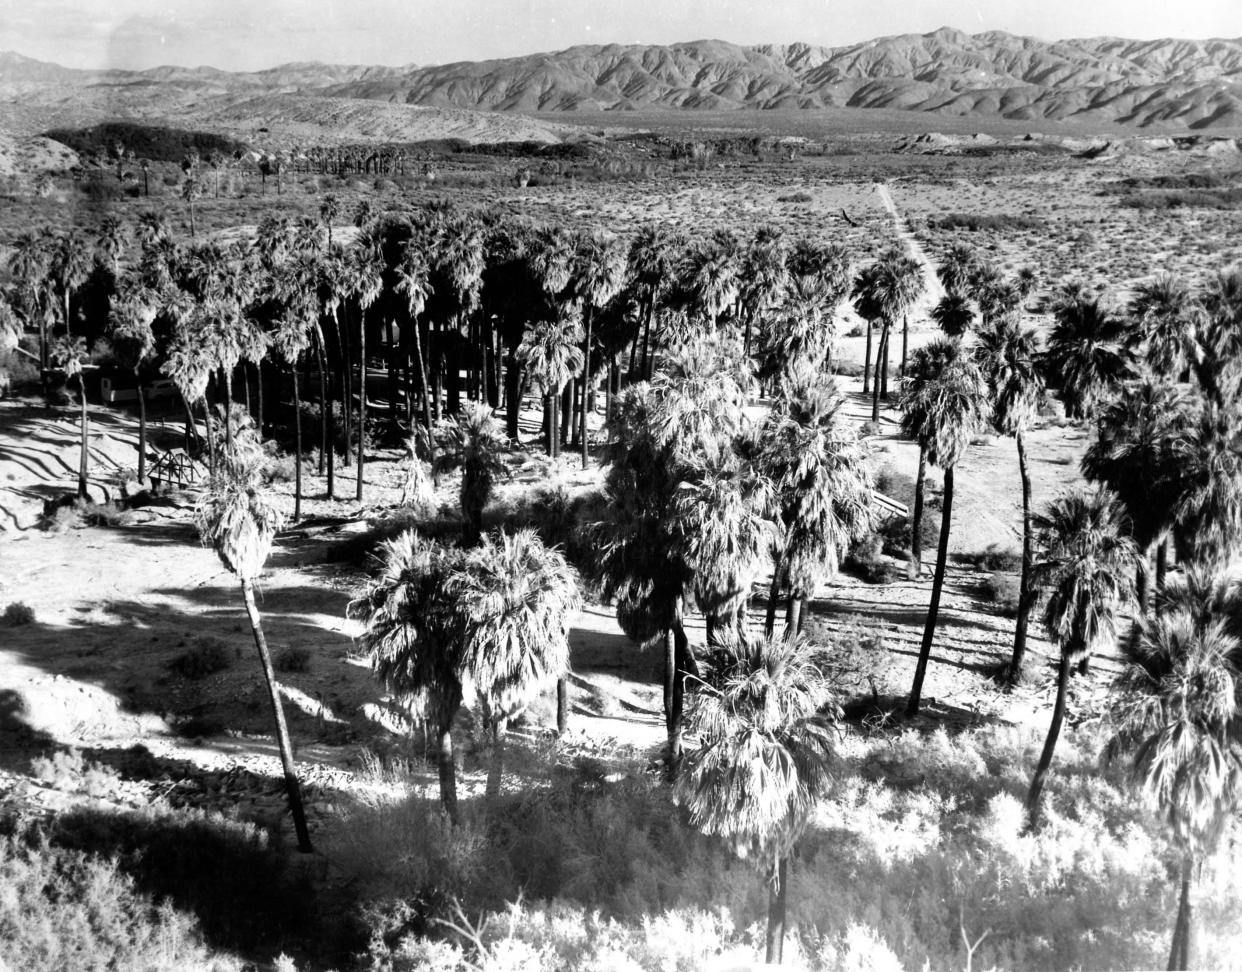 Early aerial image of the Thousand Palms Oasis